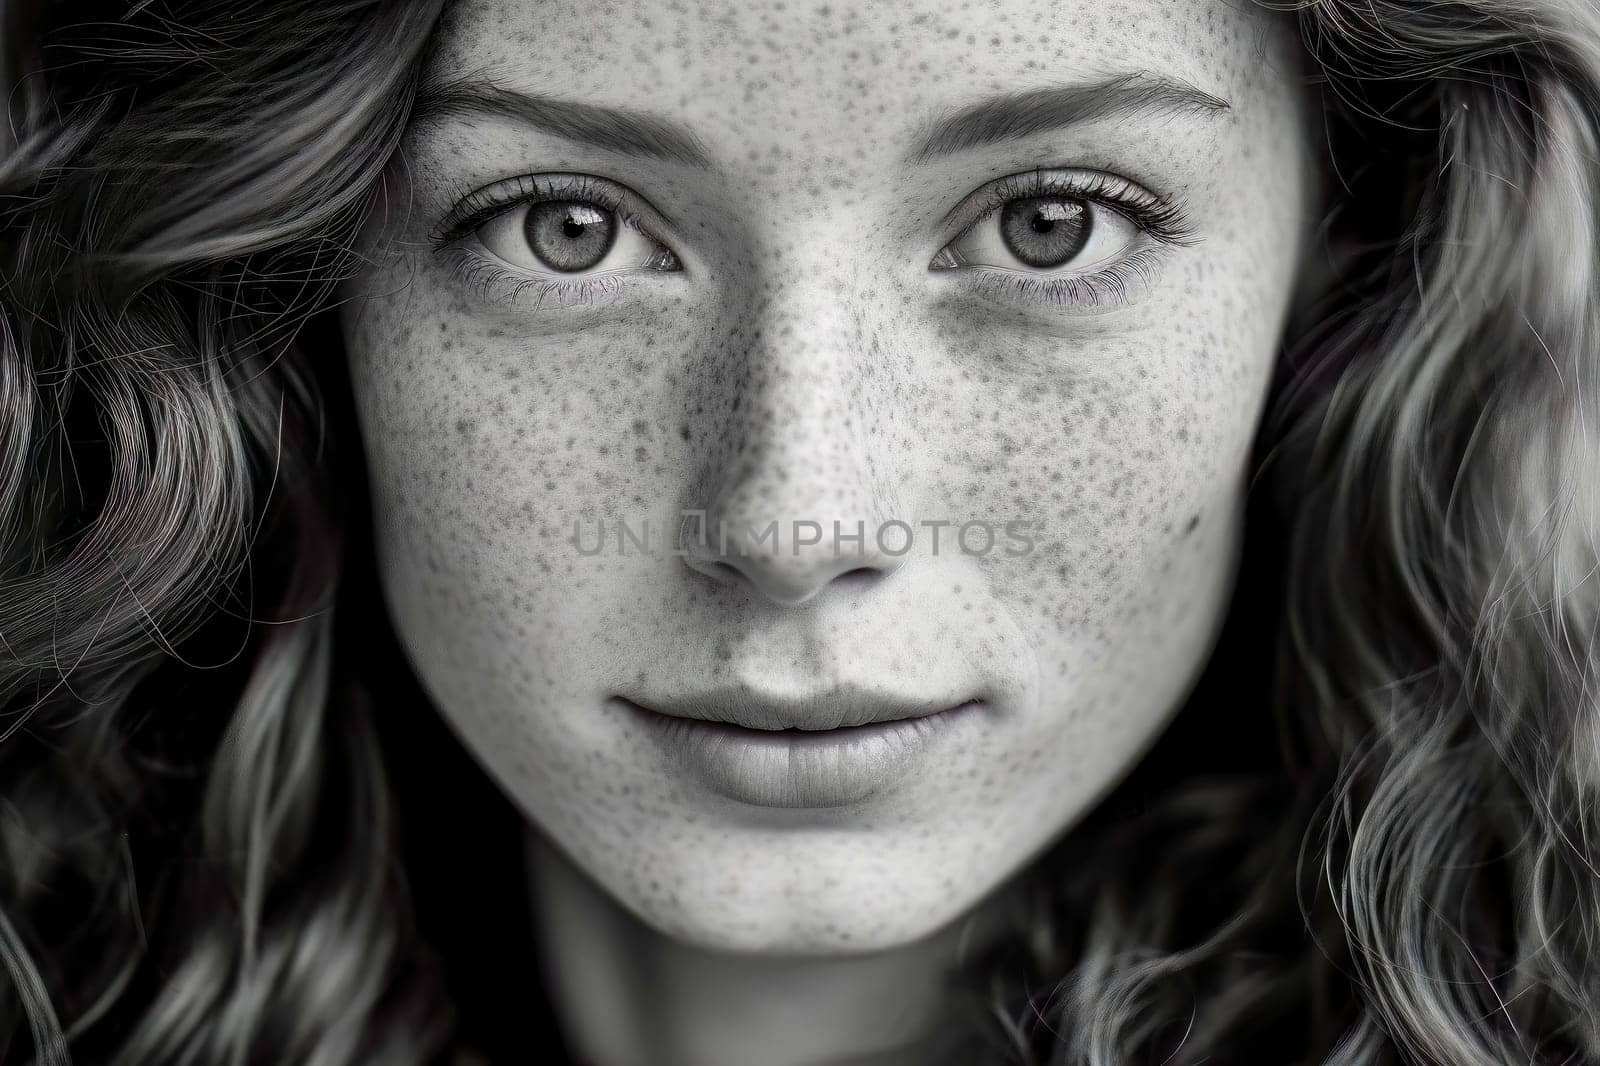 Capture the innocence and charm of a sweet girl with freckles in a black and white close-up portrait